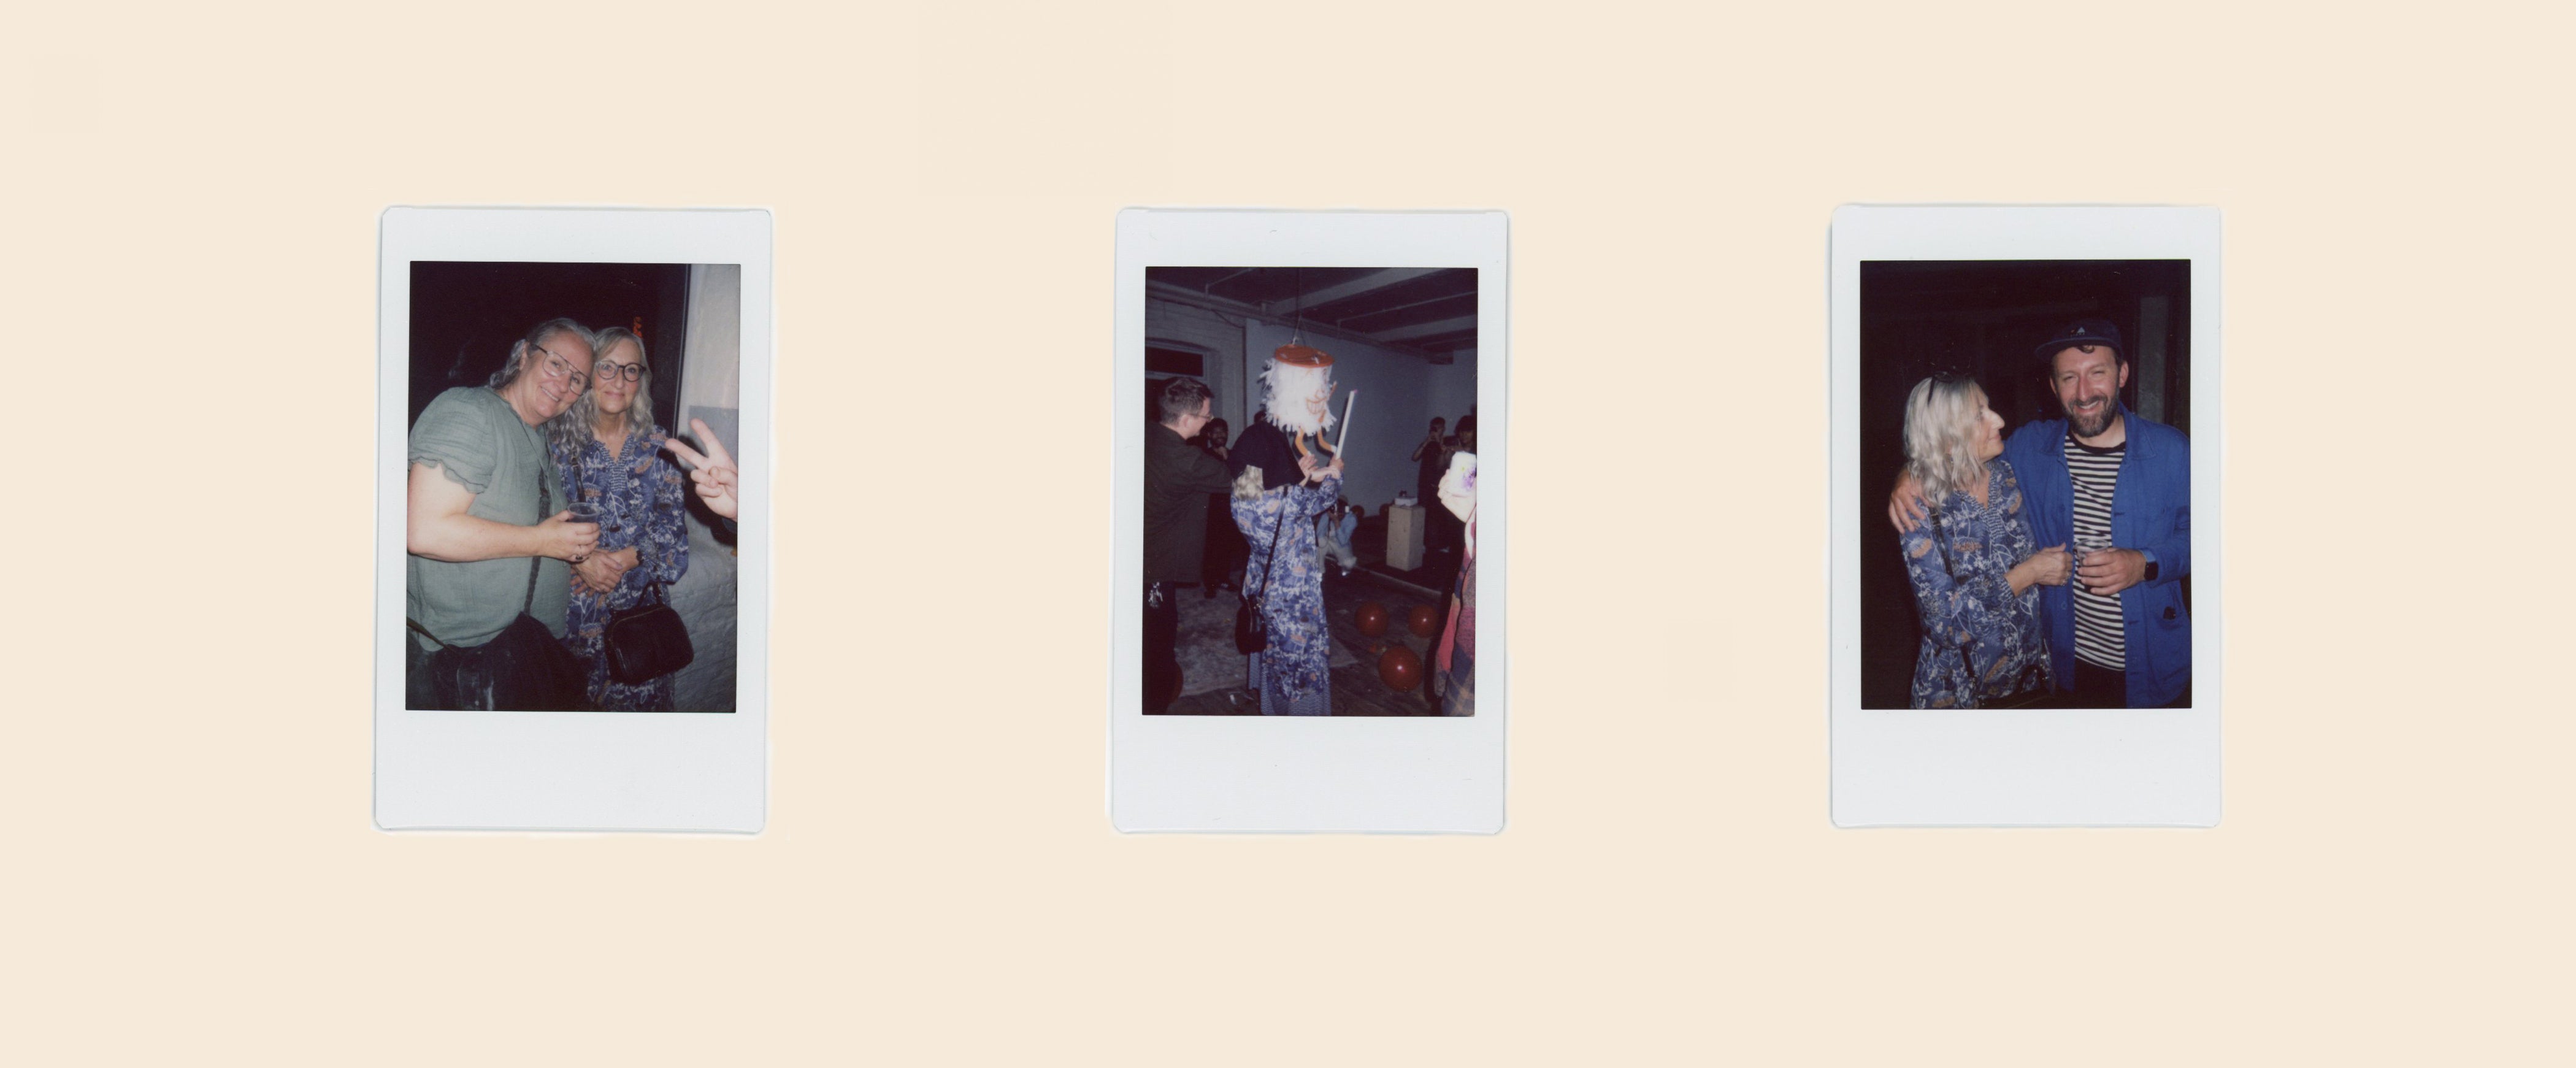 Take it easy 3rd birthday Instax pictures